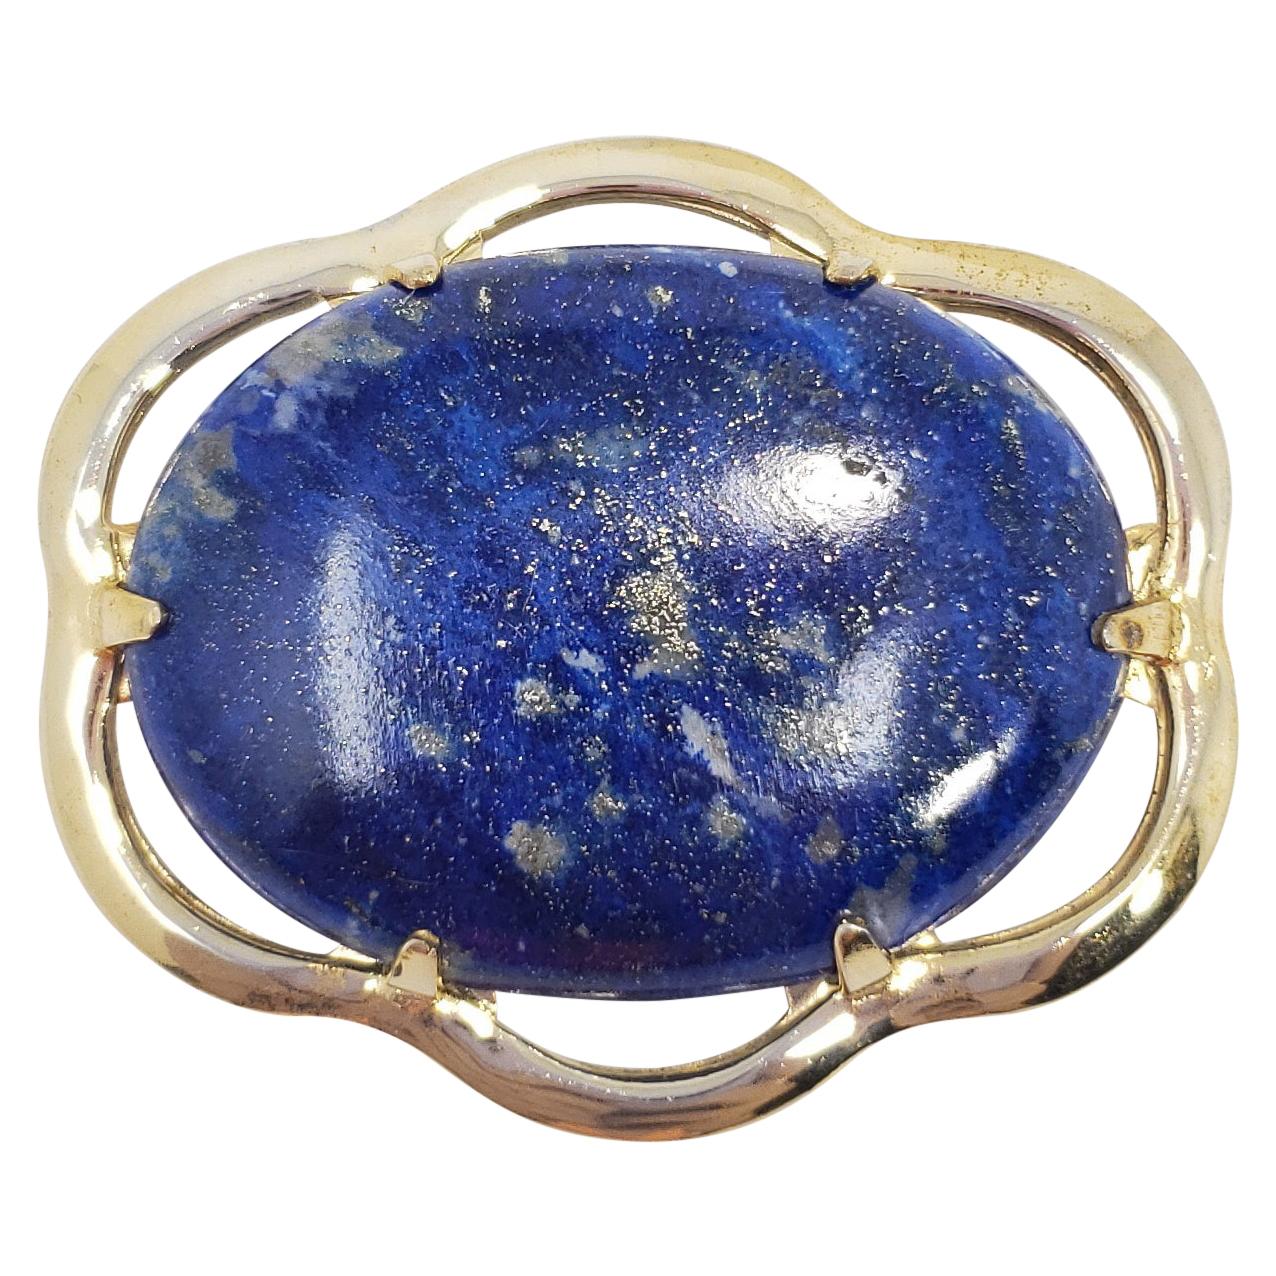 Vintage Lapis Lazuli Cabochon Pin Brooch in Gold-Filled Setting, Mid Late 1900s